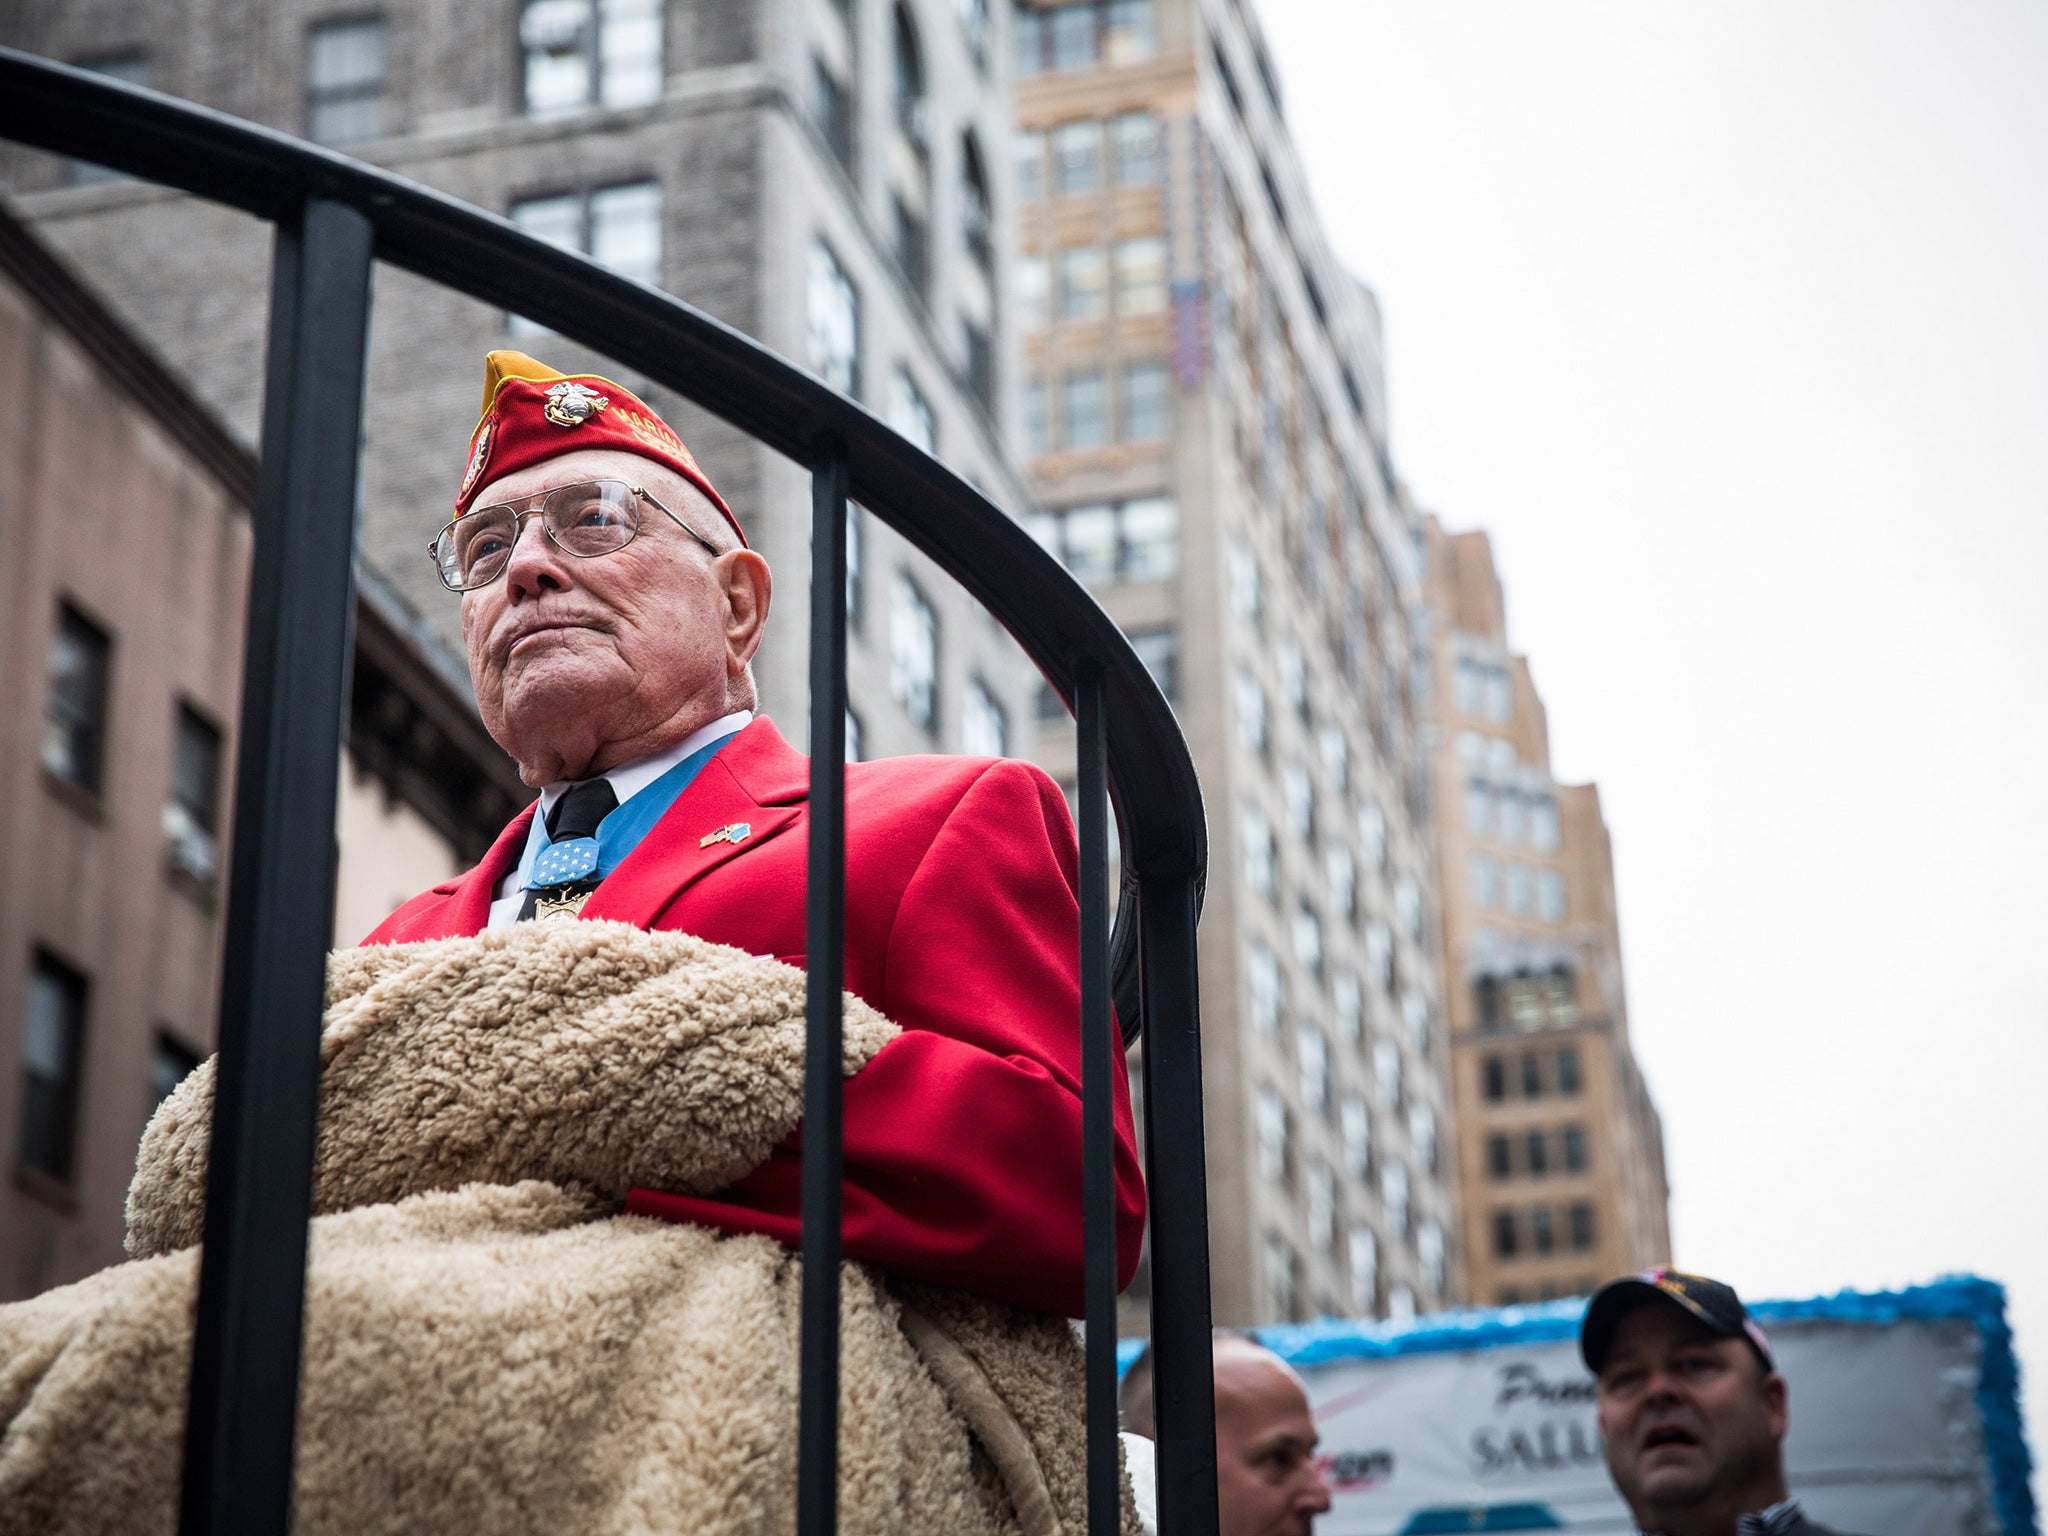 Williams on a float during the 2013 Veterans Day Parade in New York